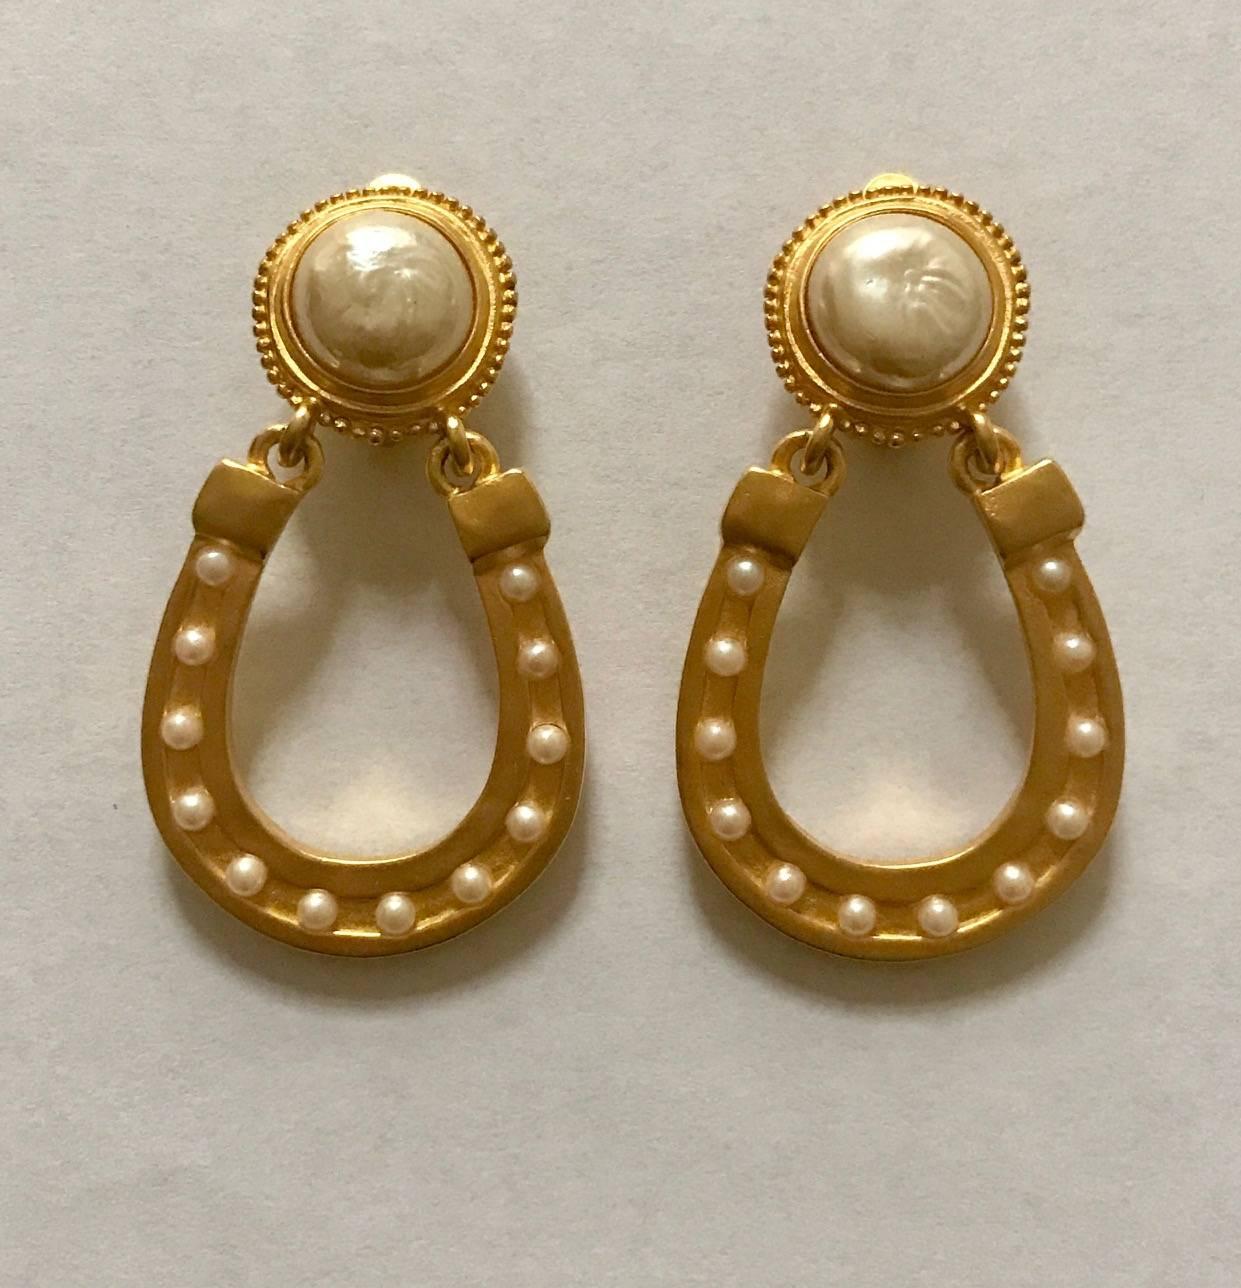 Karl Lagerfeld vintage satin finish gold tone clip on horseshoe earrings. Large faux pearl at top, and small faux pearls throughout horseshoe. Clip fastener.

Approximately 2.5